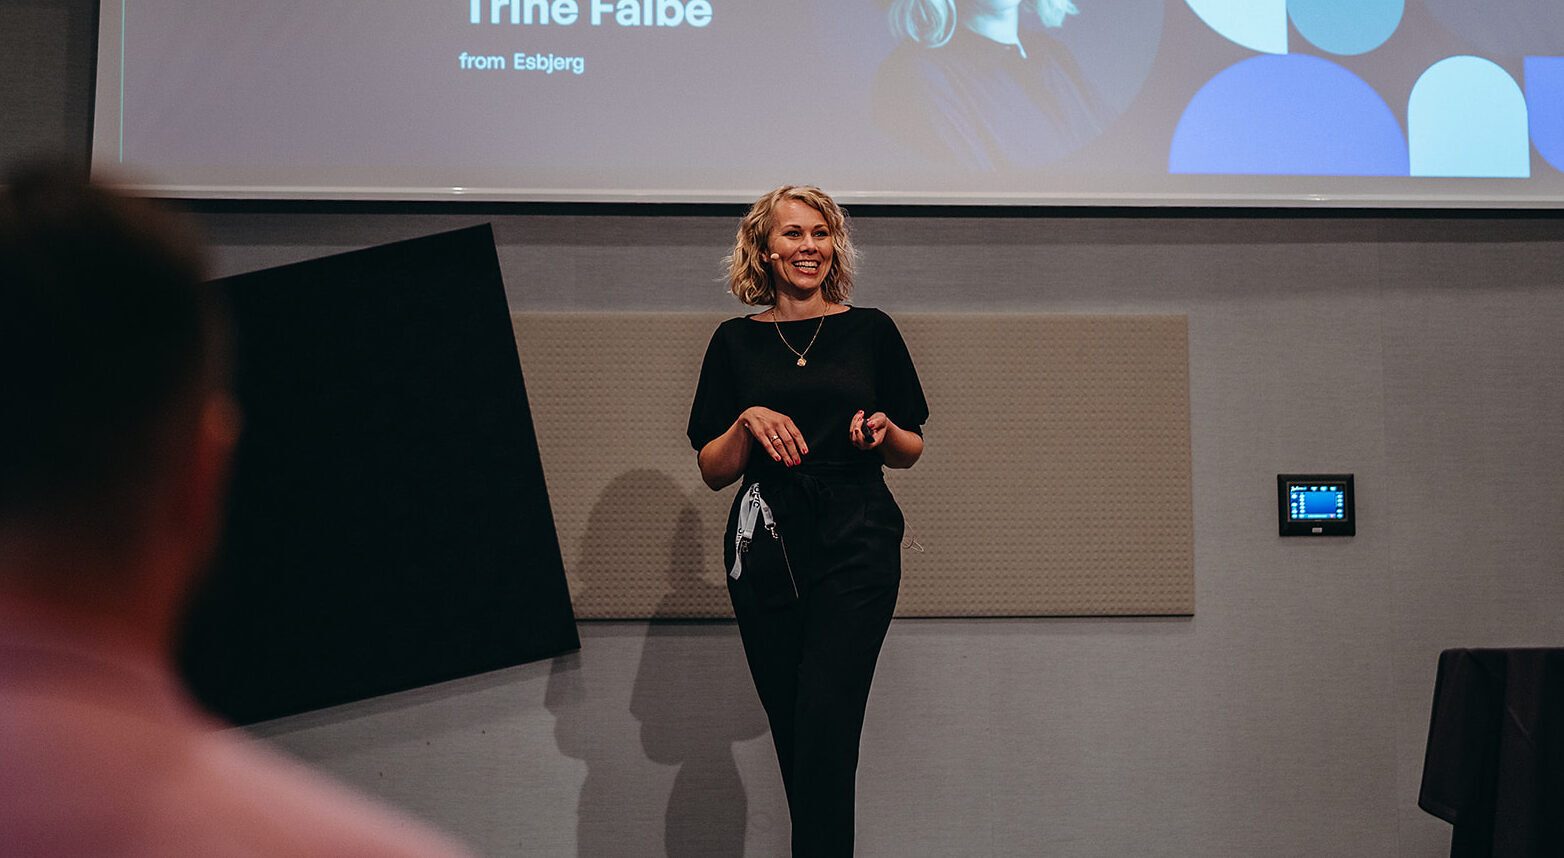 Trine Falbe on stage, at a conference